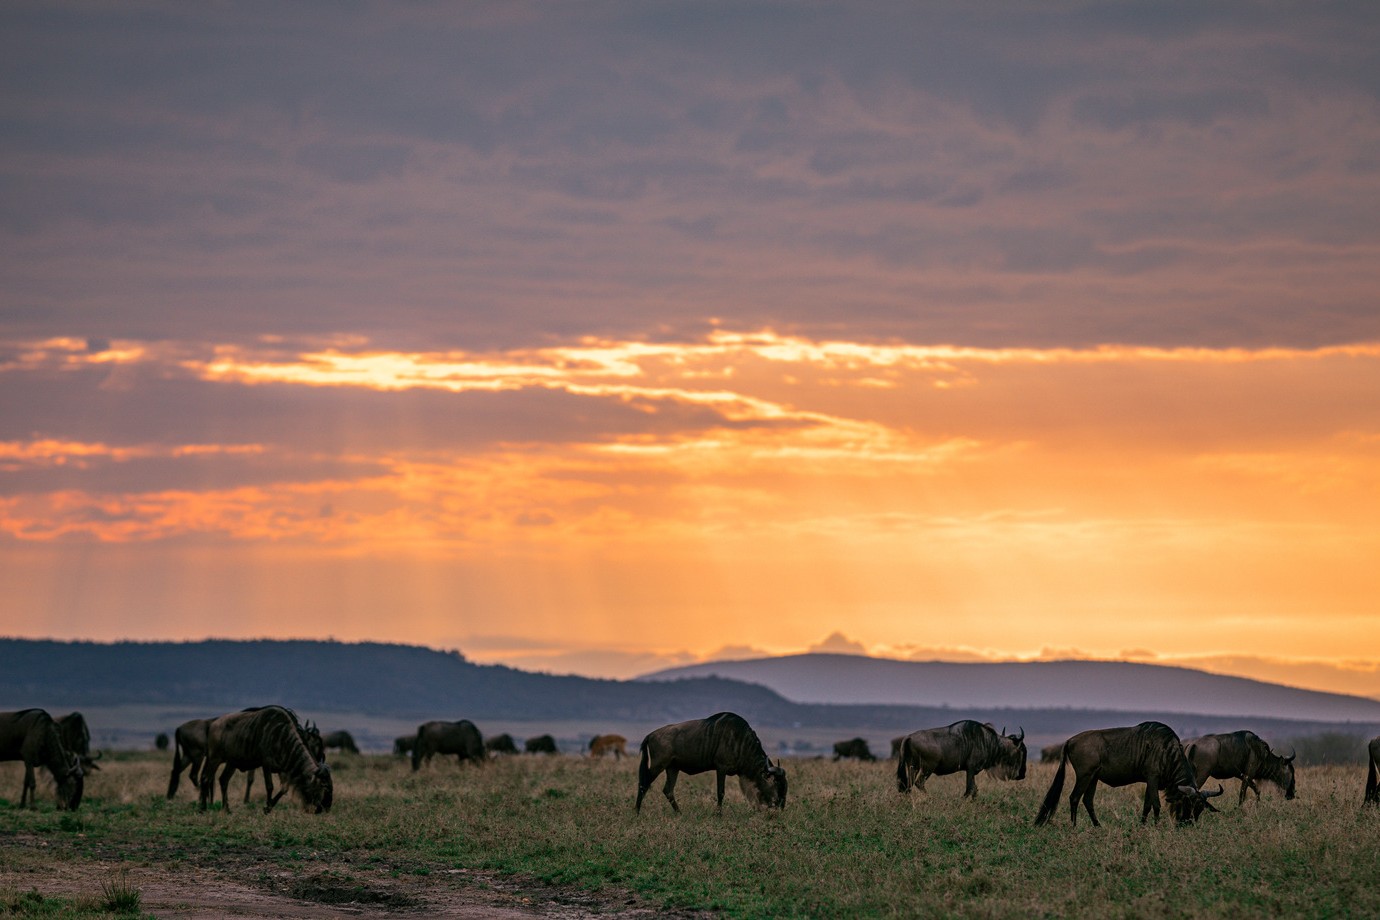 Herd of wild animals grazing on grass during a sunset